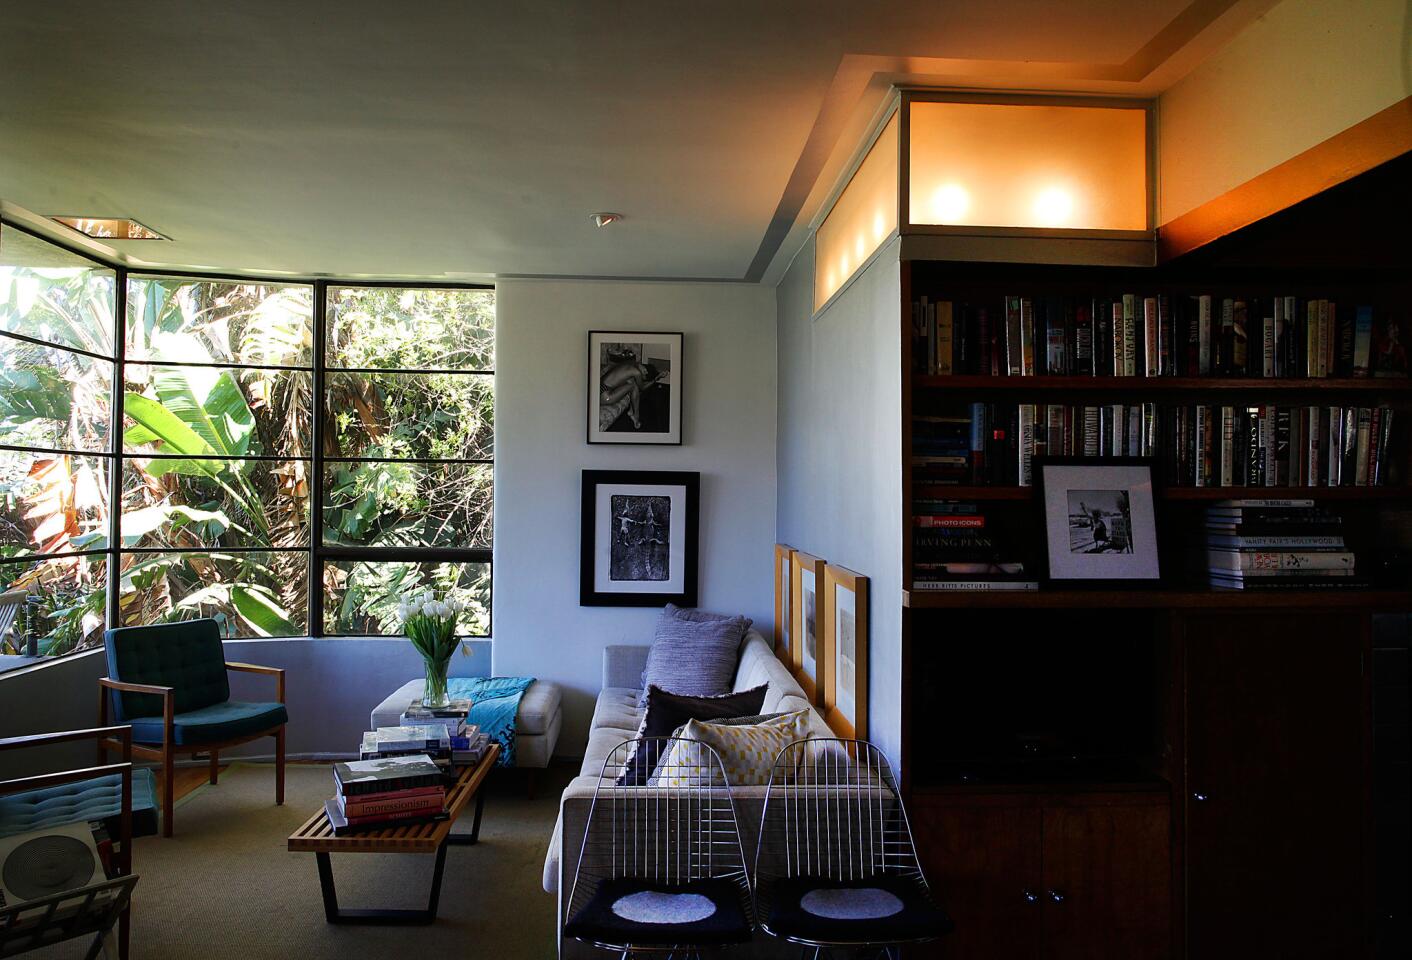 The curving lines of the window are just the first of William Kesling's Streamline Moderne elements in Jay Huguley's house. Huguley chose not to hang curtains, favoring garden views and light over privacy. Note the built-in light box above the bookcase.